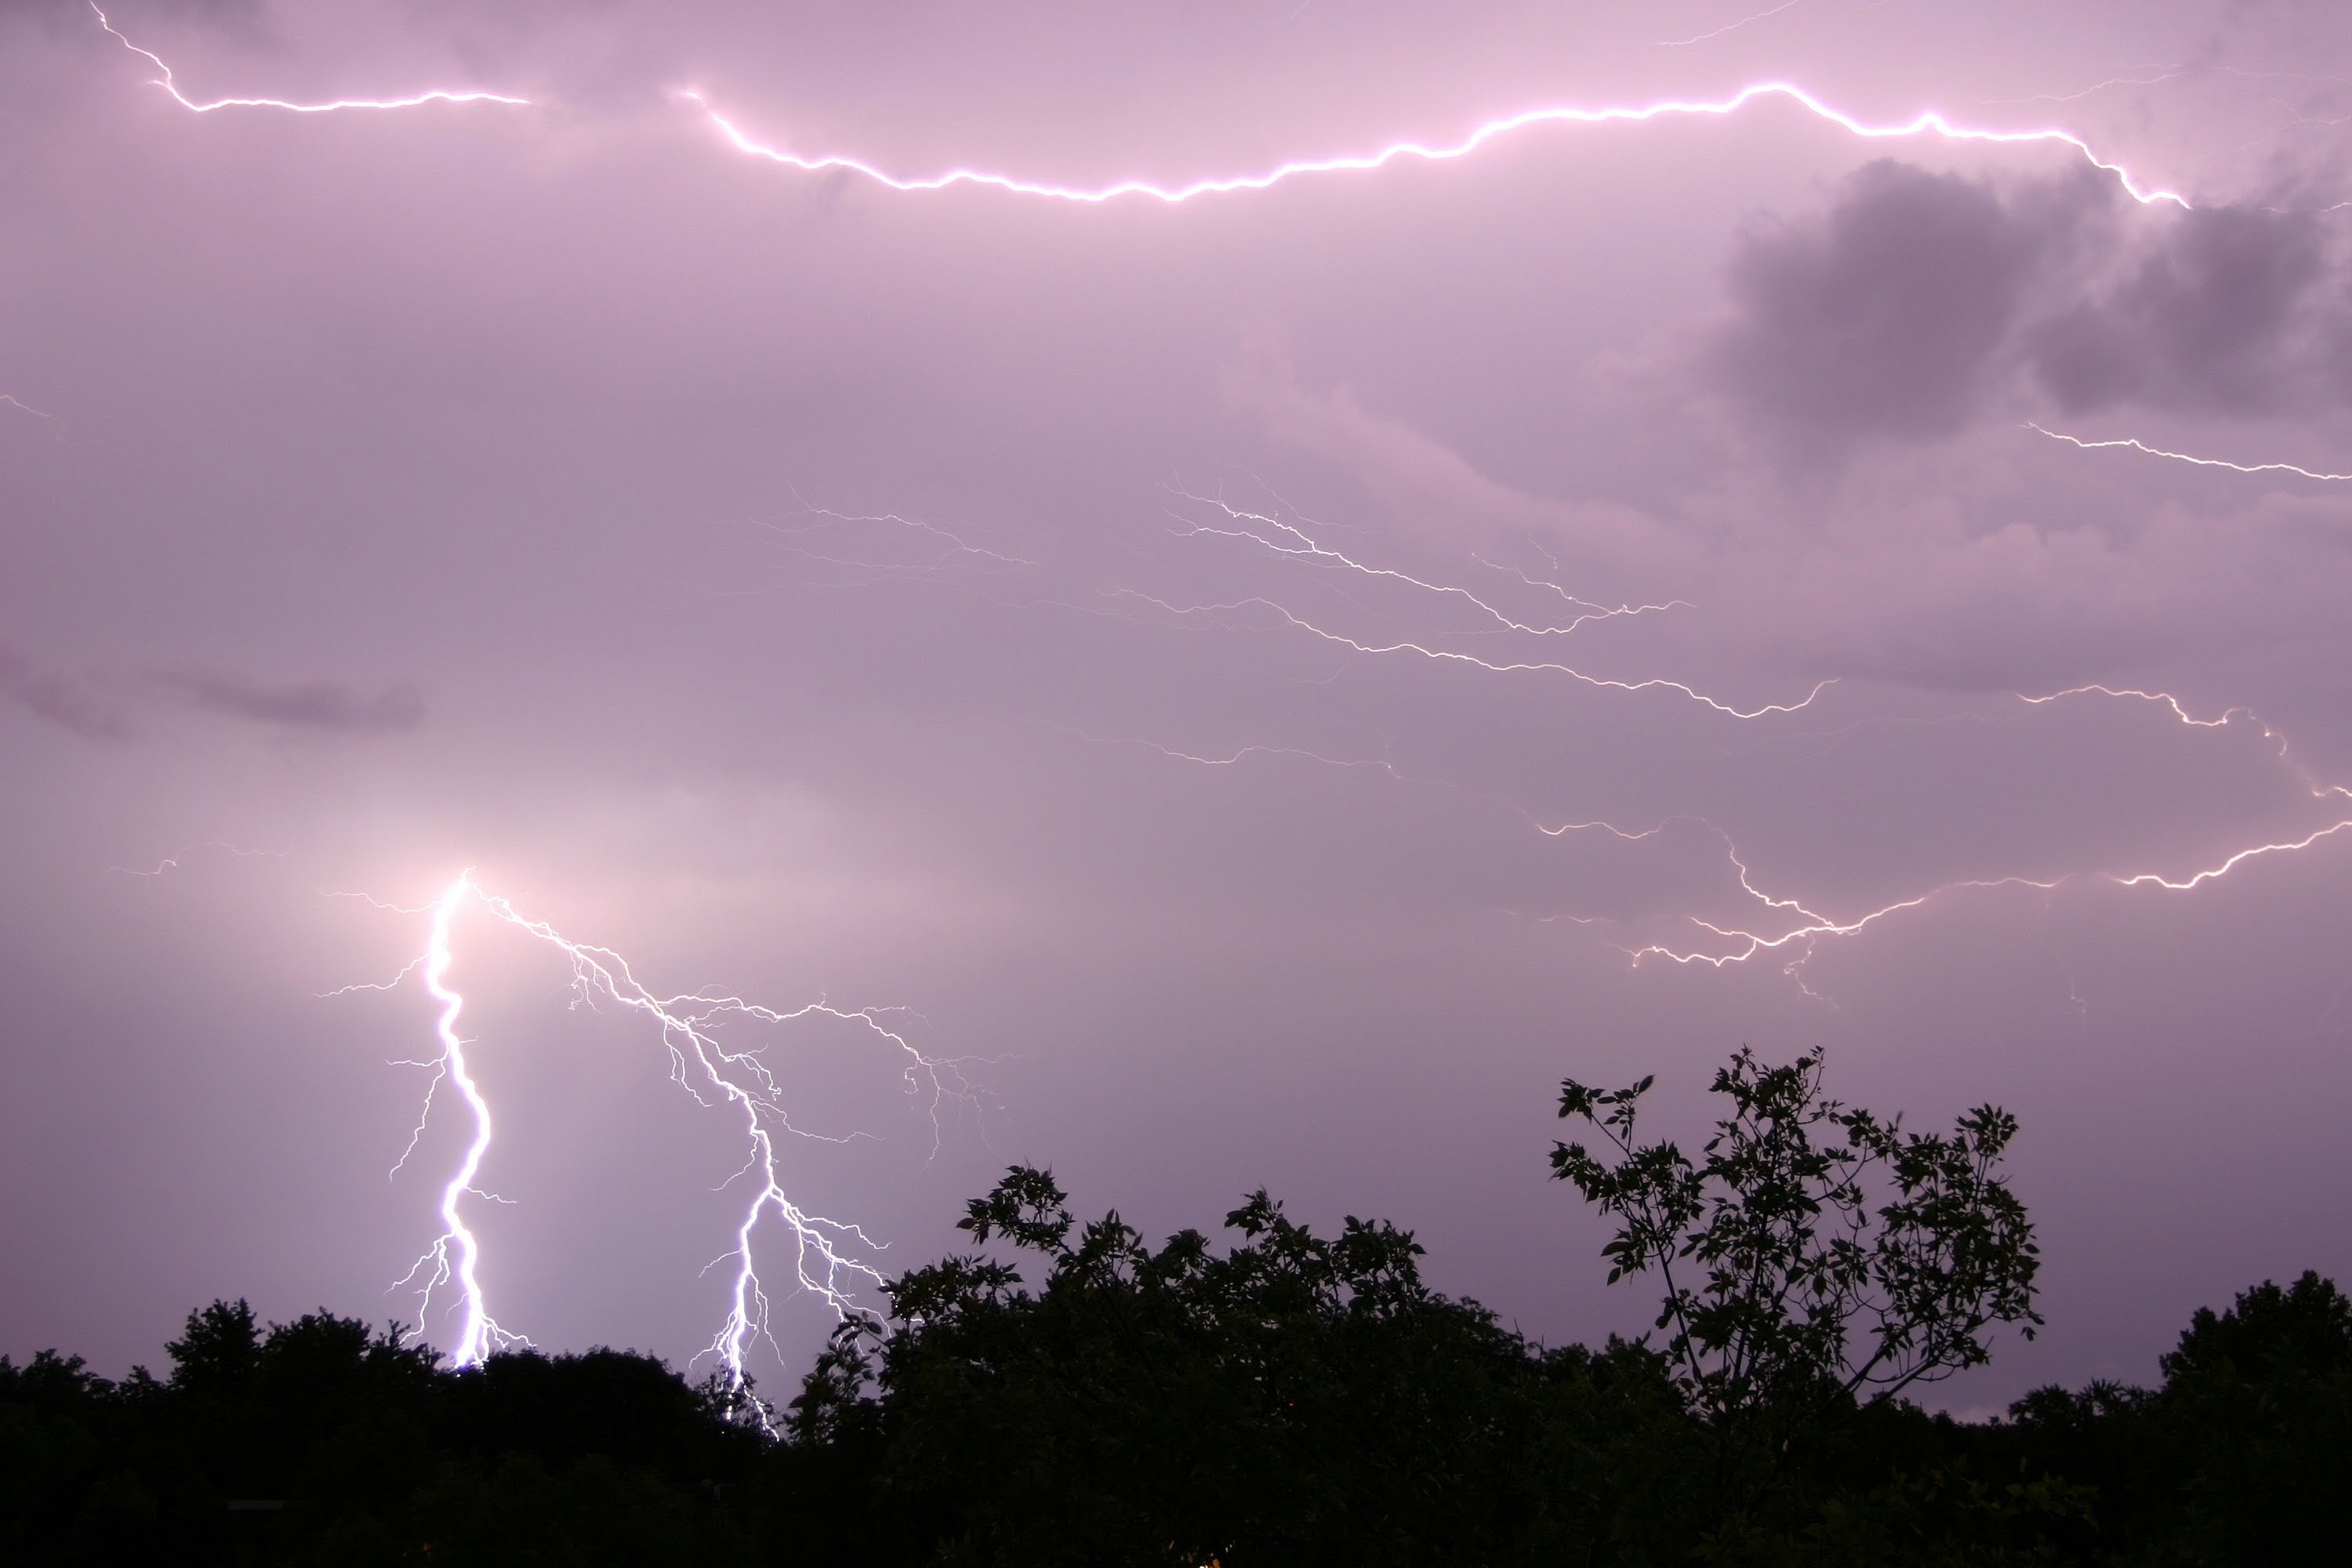 A Thunderstorm in Mentone – a Poem for my Father